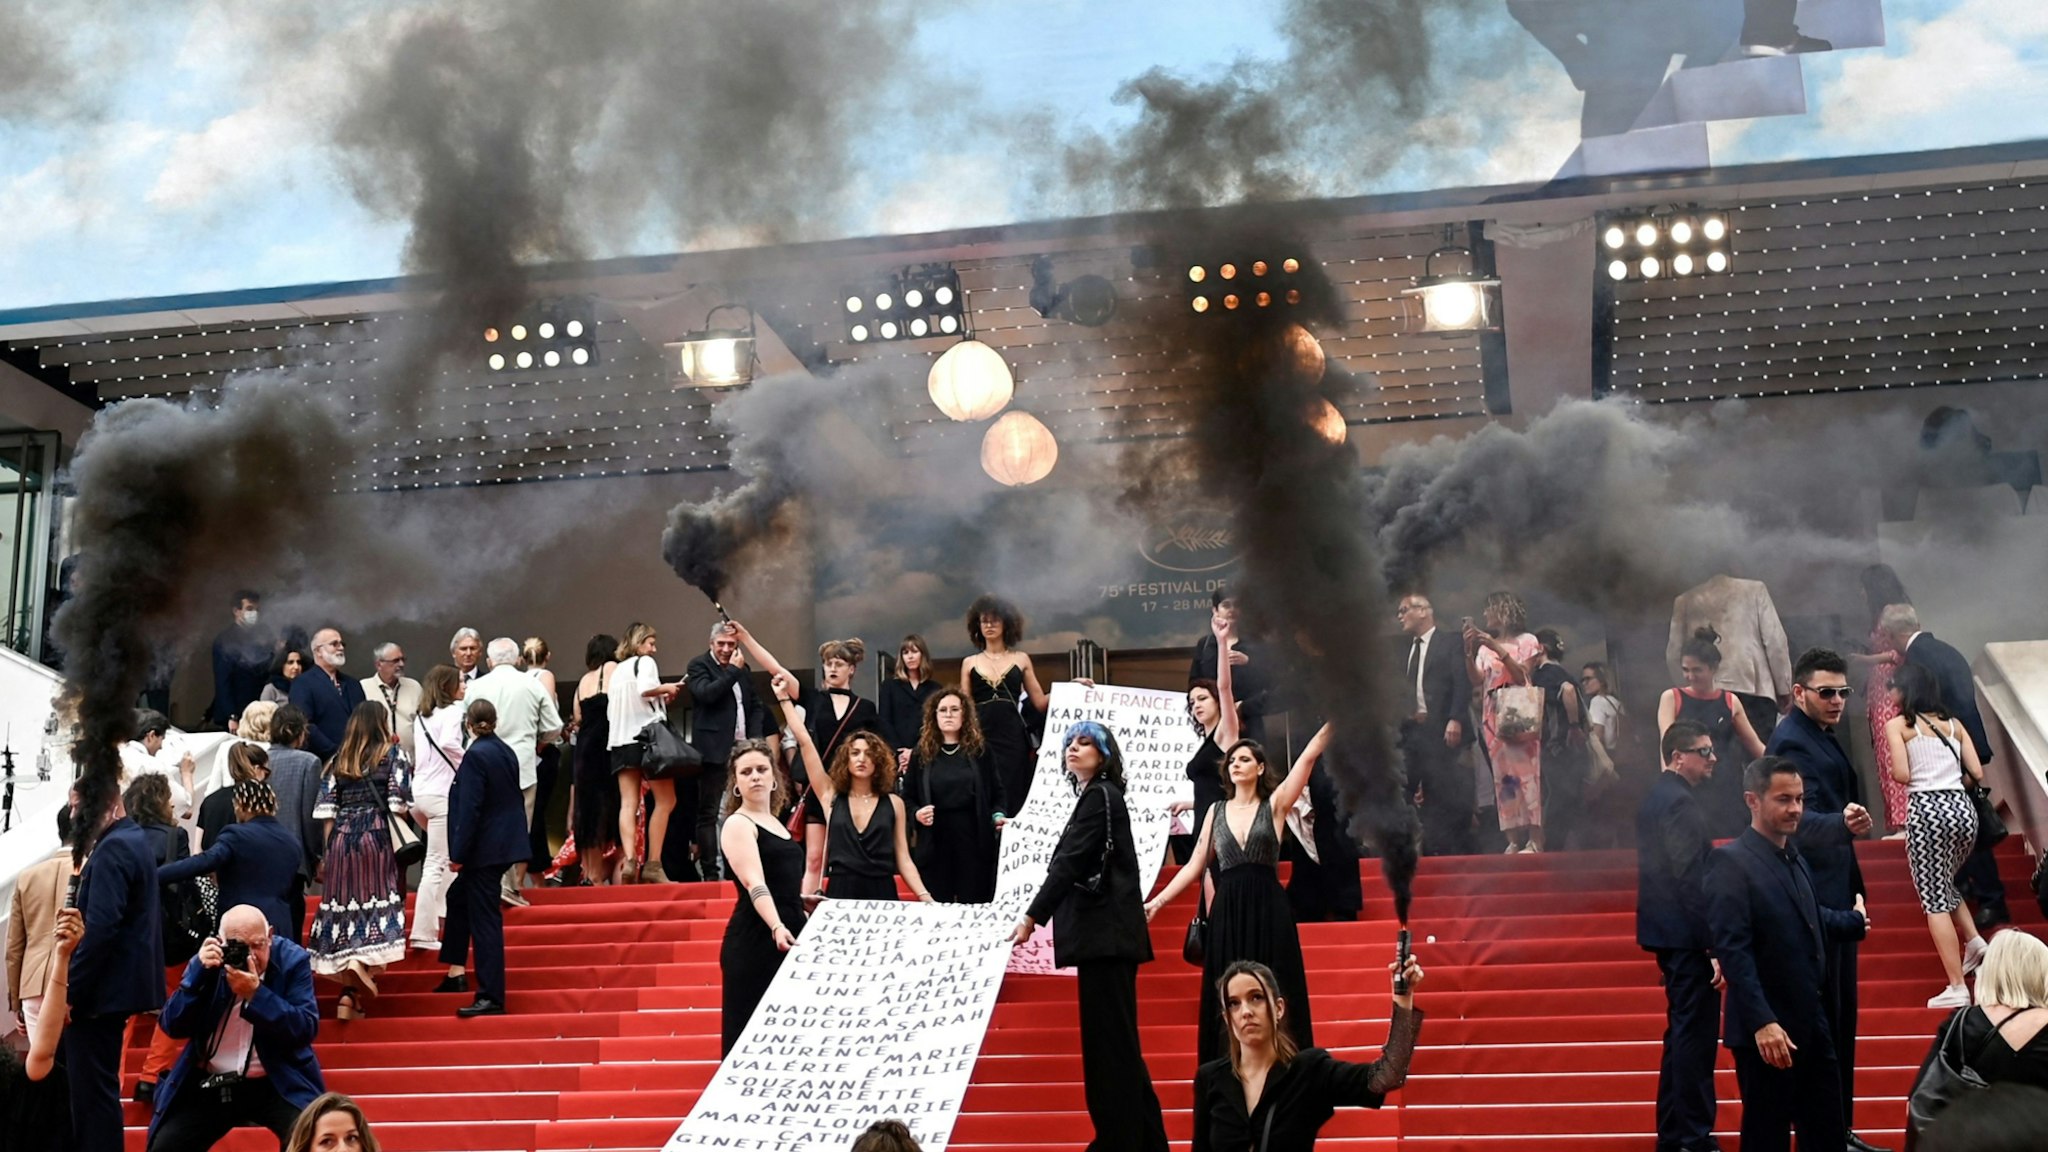 French photographer Raymond Depardon (3rdR) takes photos of members of the feminist movement "Les Colleuses" holding a banner bearing the names of 129 women who died as a result of domestic violence since the last Cannes Film Festival, before the screening of the film "Holy Spider" during the 75th edition of the Cannes Film Festival in Cannes, southern France, on May 22, 2022.